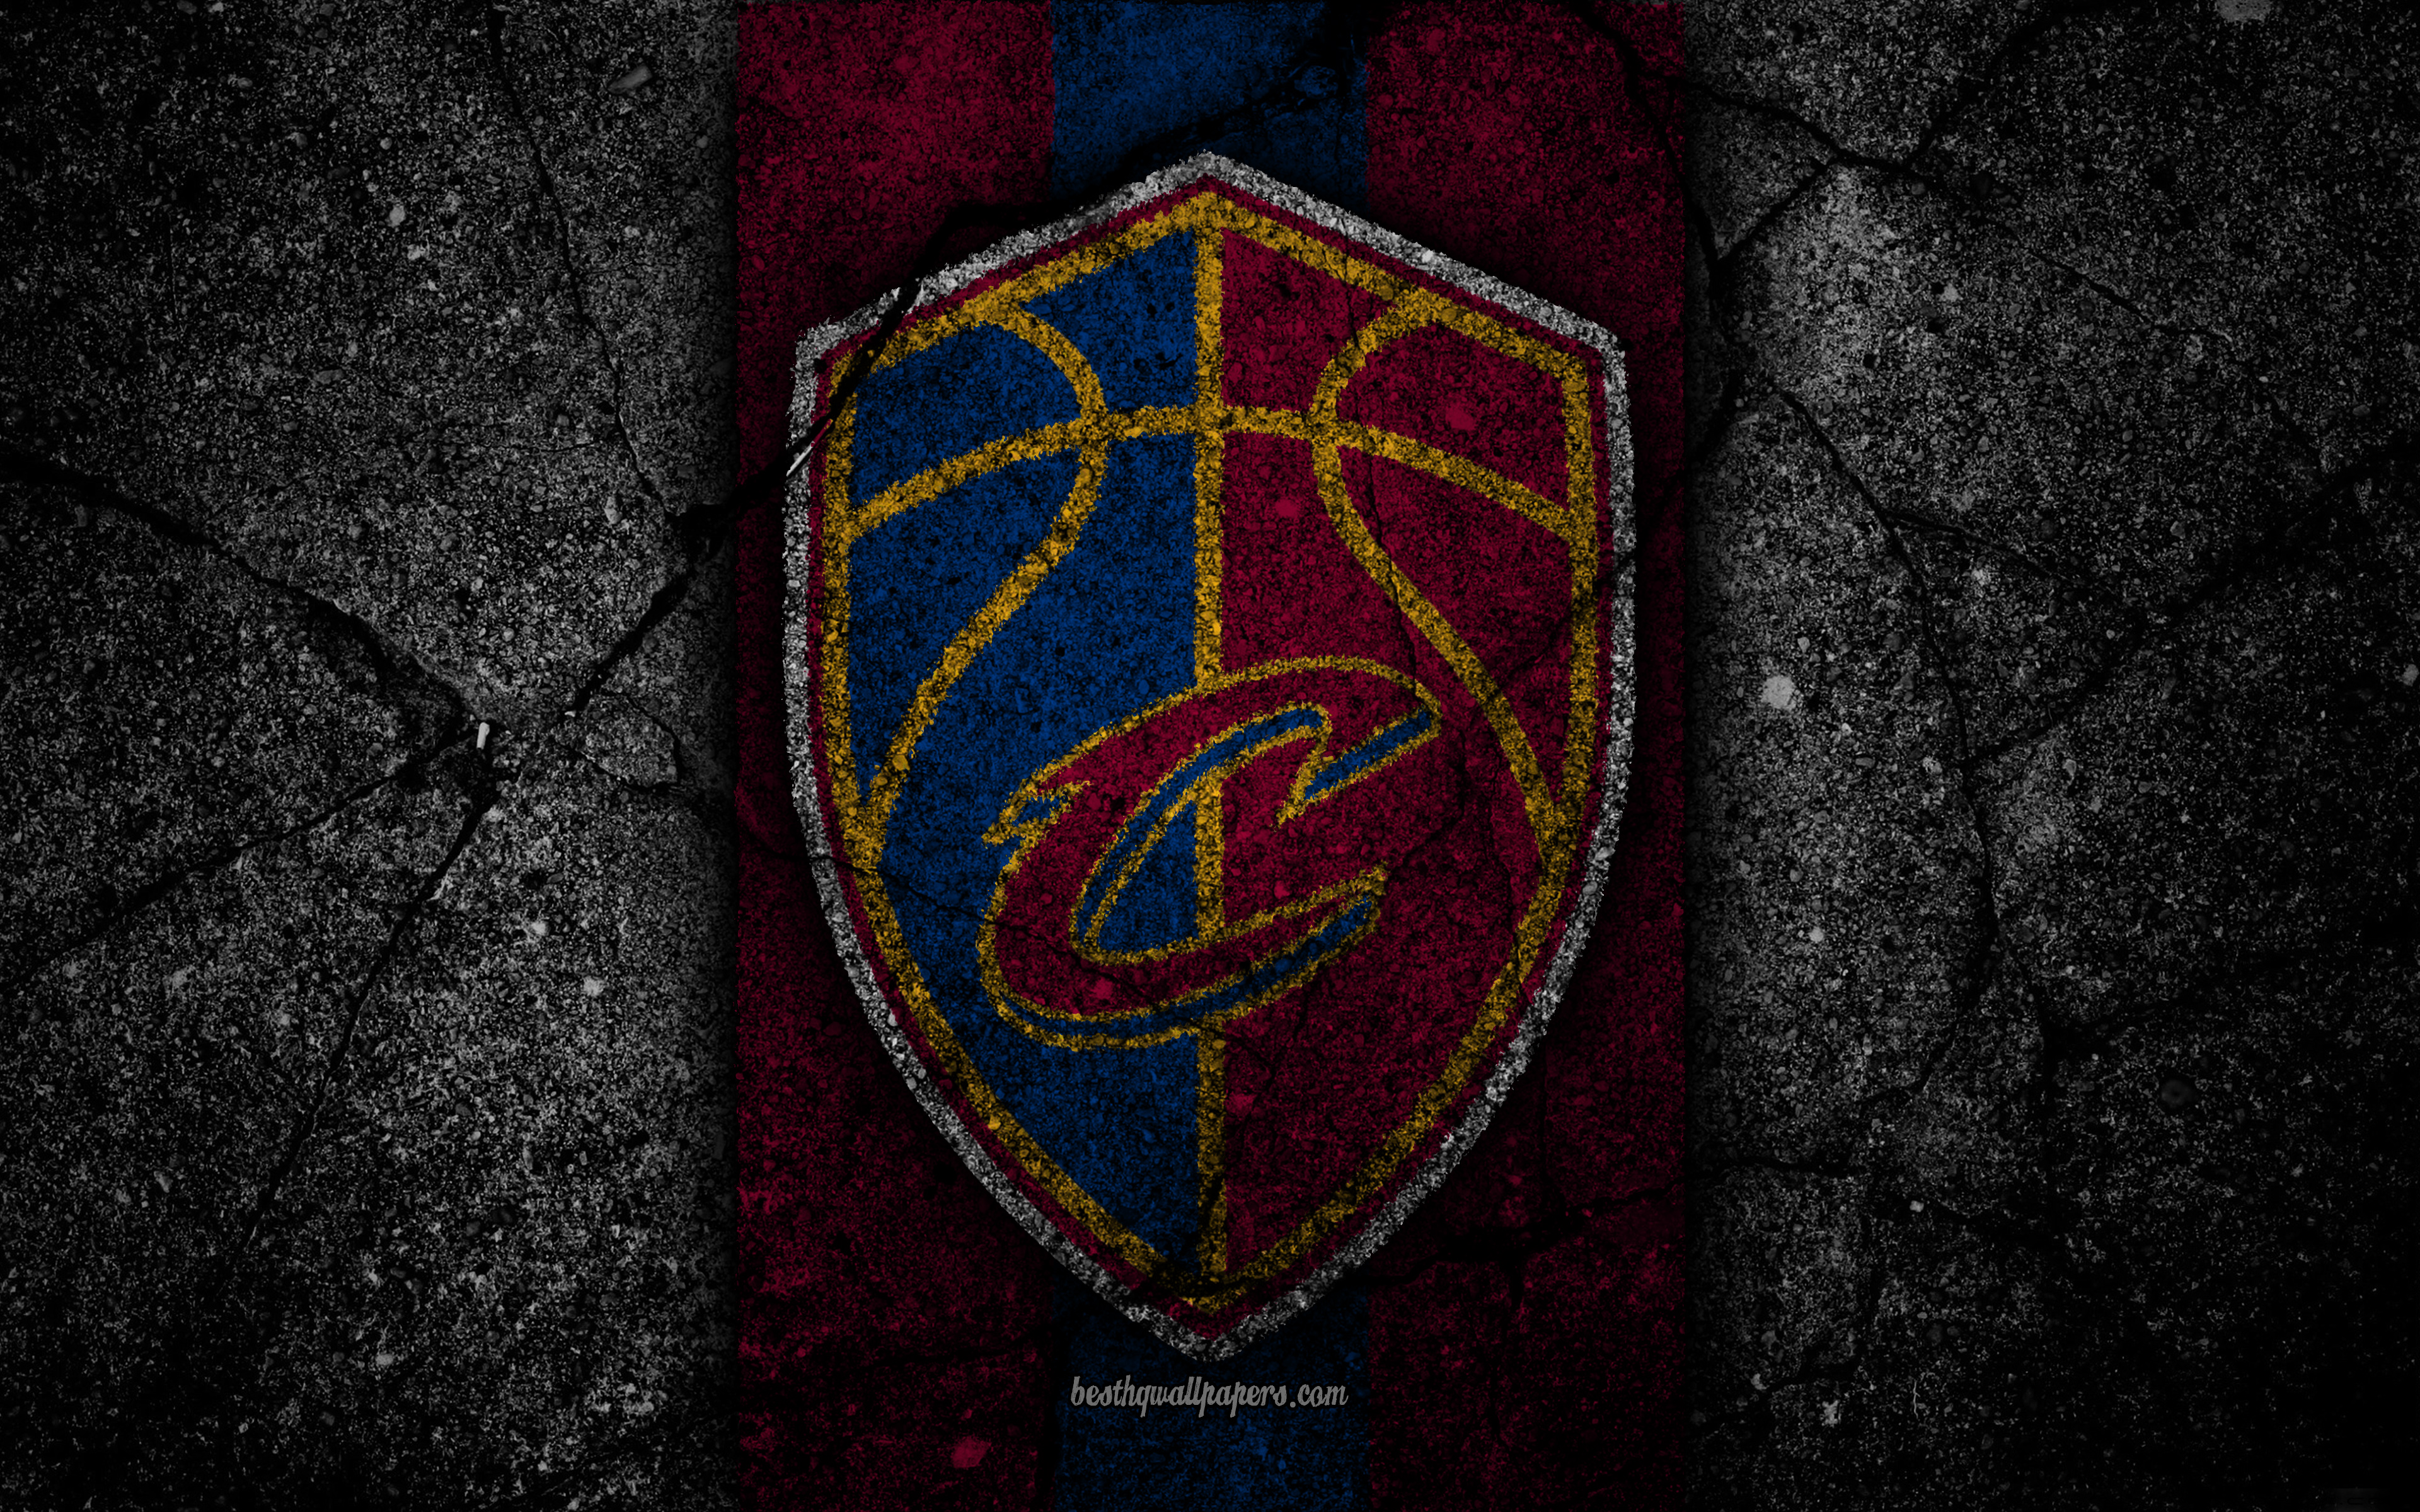 Download wallpaper Cleveland Cavaliers, NBA, 4k, logo, black stone, basketball, Eastern Conference, asphalt texture, USA, creative, CAVS, basketball club, Cleveland Cavaliers logo for desktop with resolution 3840x2400. High Quality HD picture wallpaper